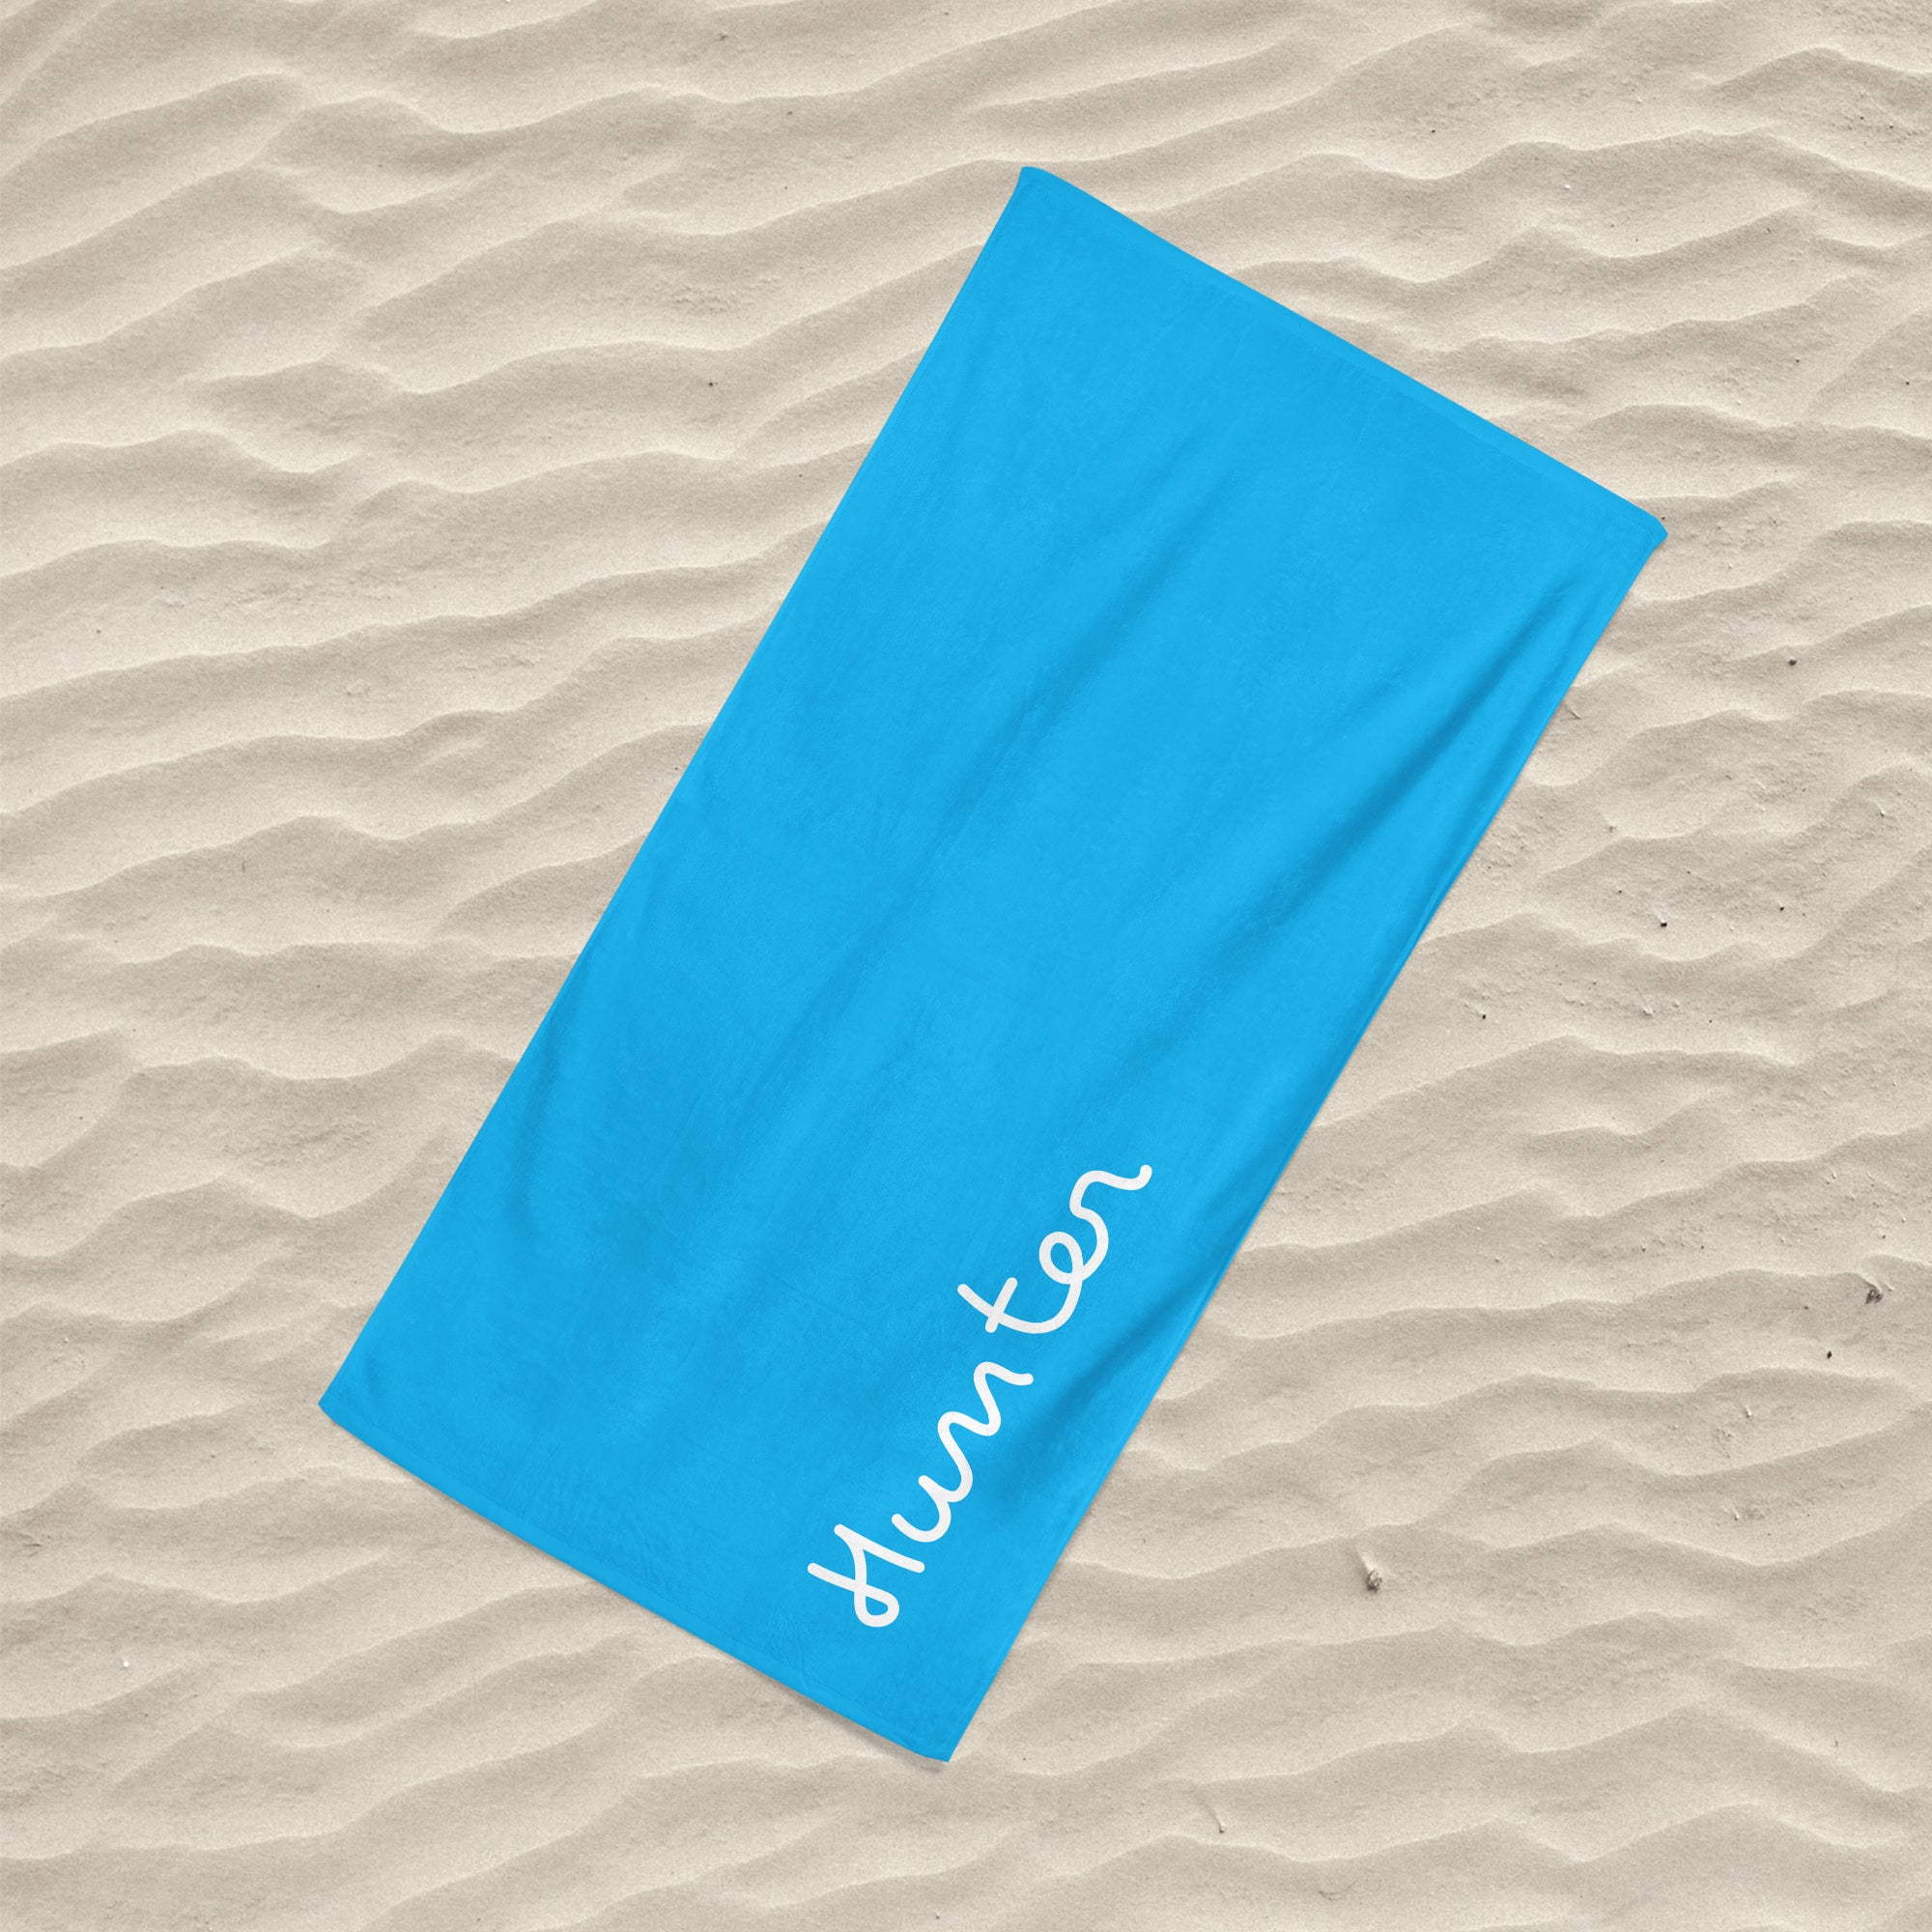 Island Inspired Large Beach Towel White on Blue - Personalise with Name